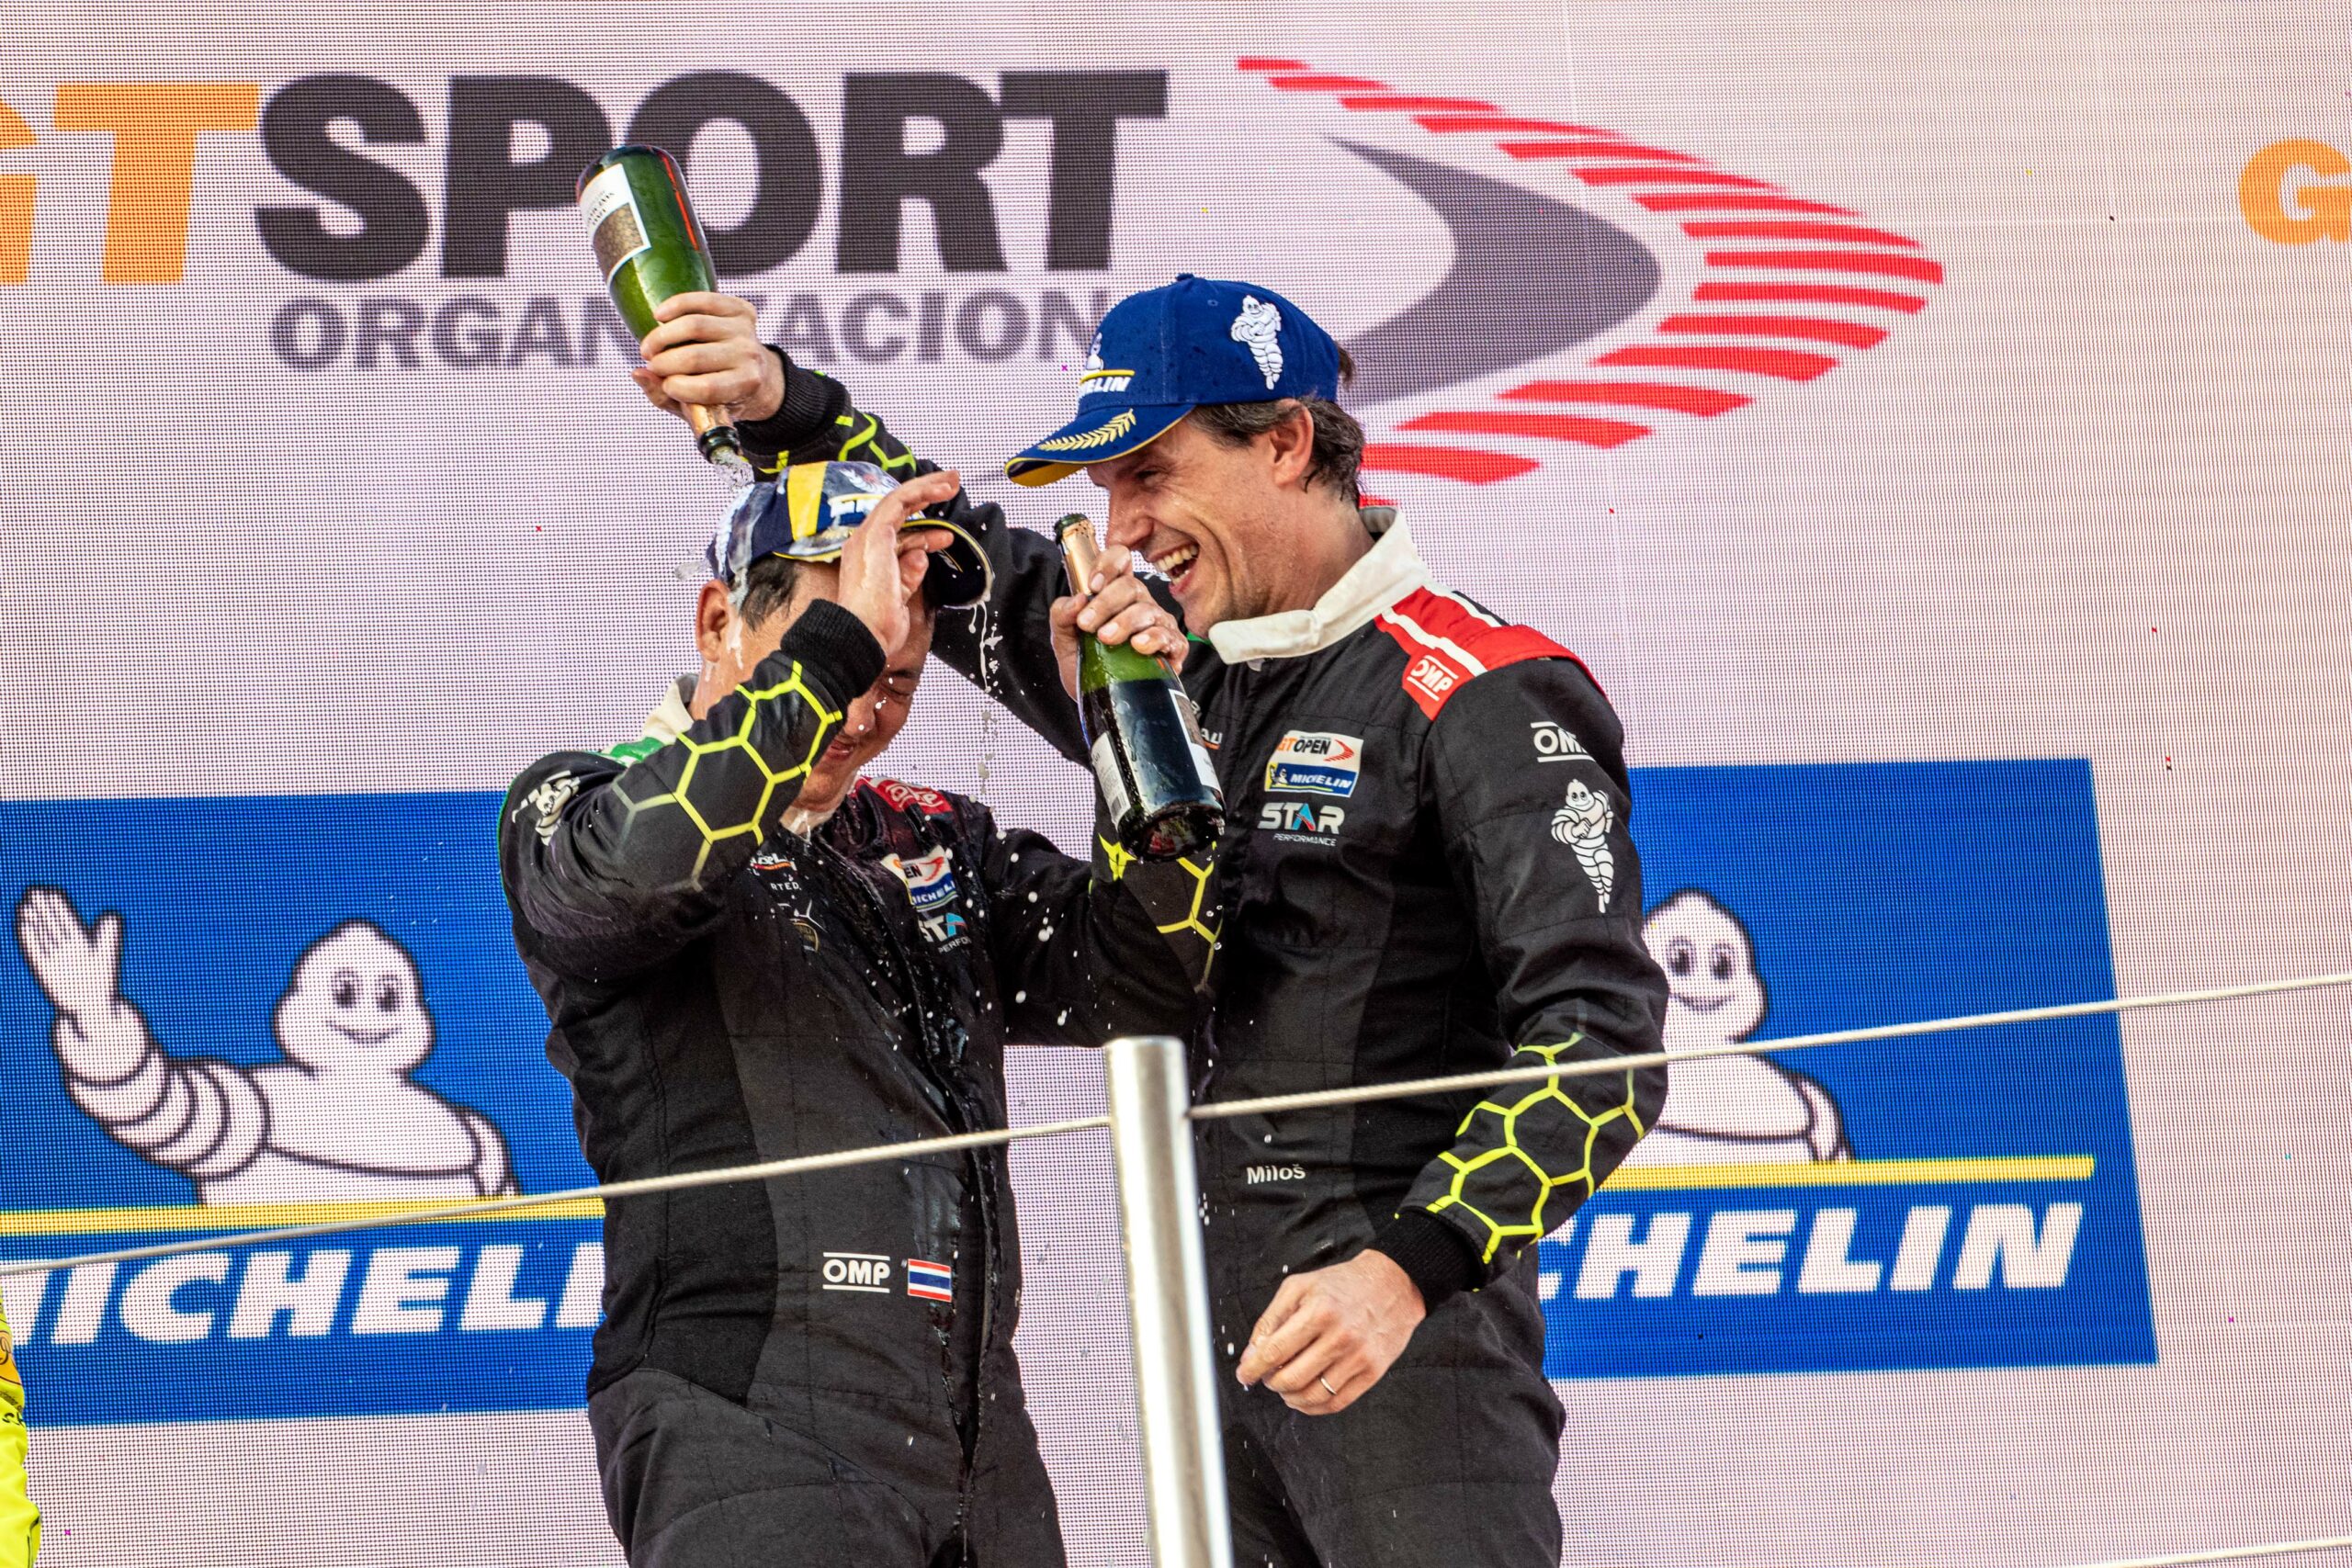 Milos Pavlovic and Pek celebrating their first win of the season in GT Open